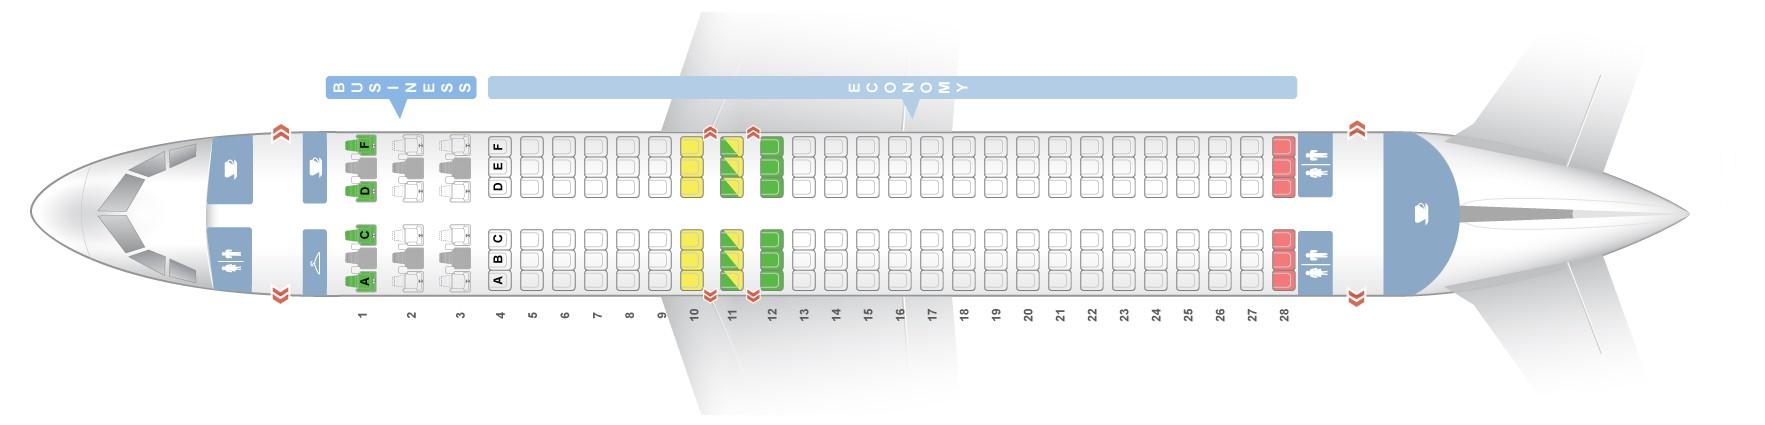 Seat map Airbus A320-200 Brussels Airlines. Best seats in the plane